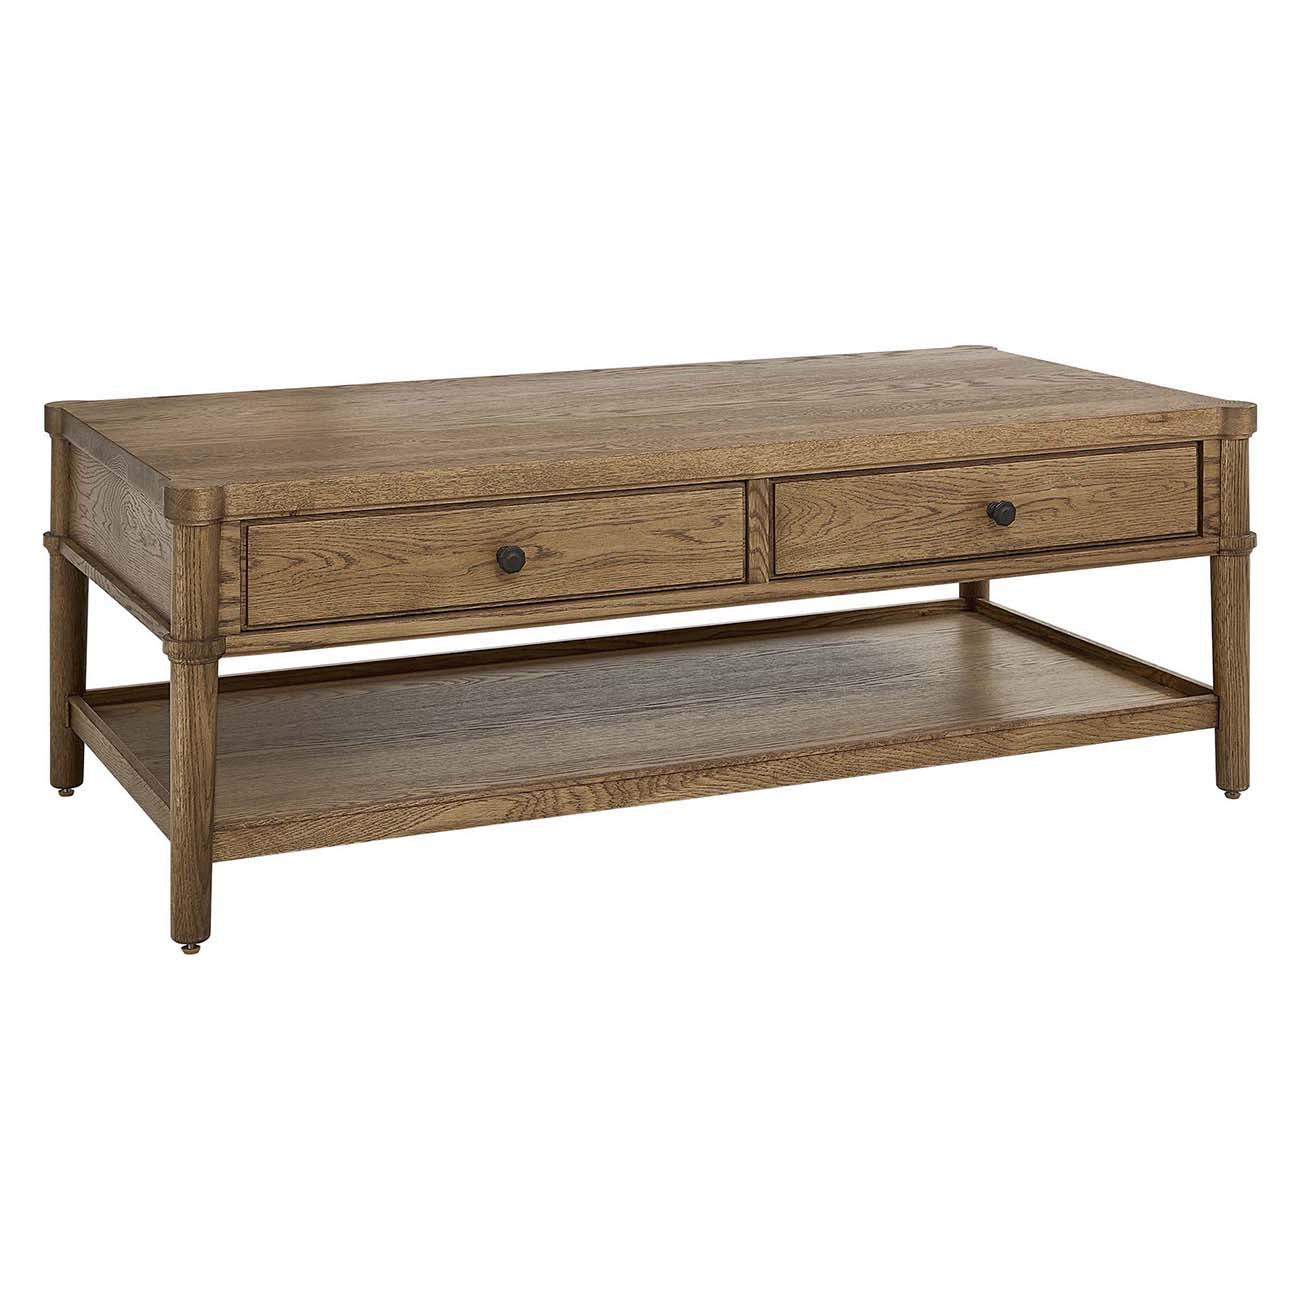 St. Lawrence Post Cocktail Table - Stickley Brand